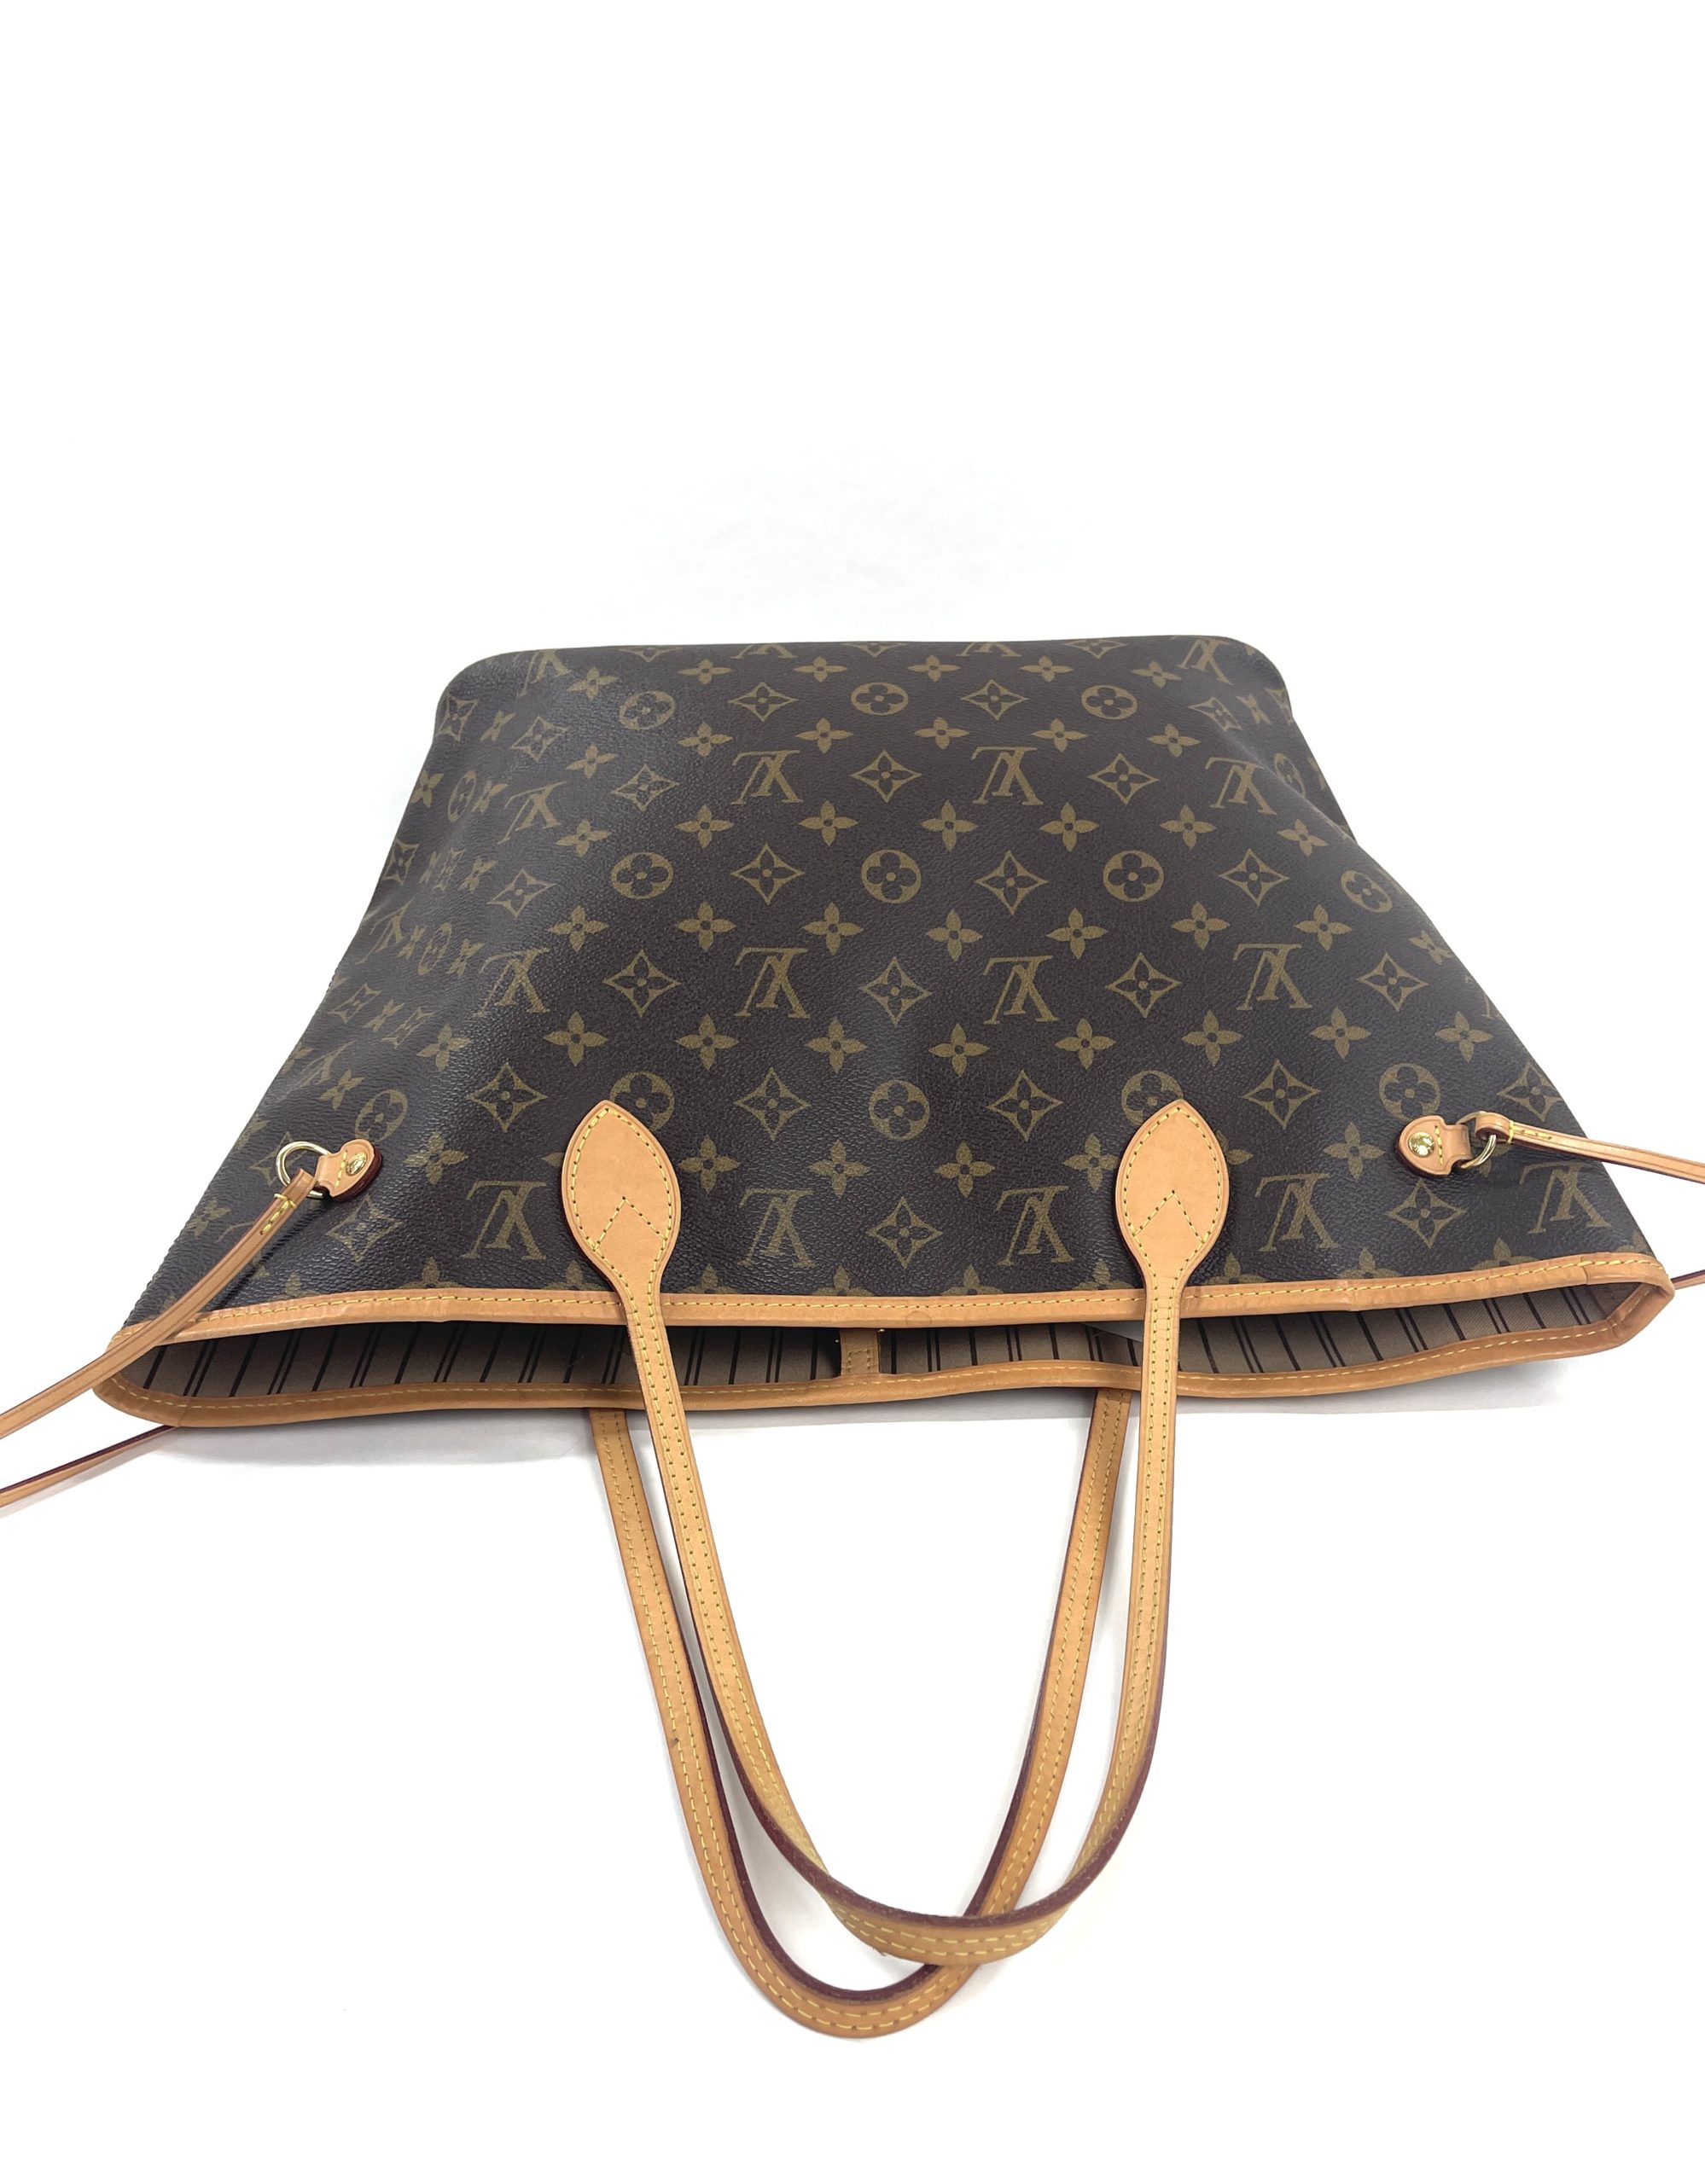 Louis+Vuitton+Neverfull+Tote+MM+Beige+Leather for sale online